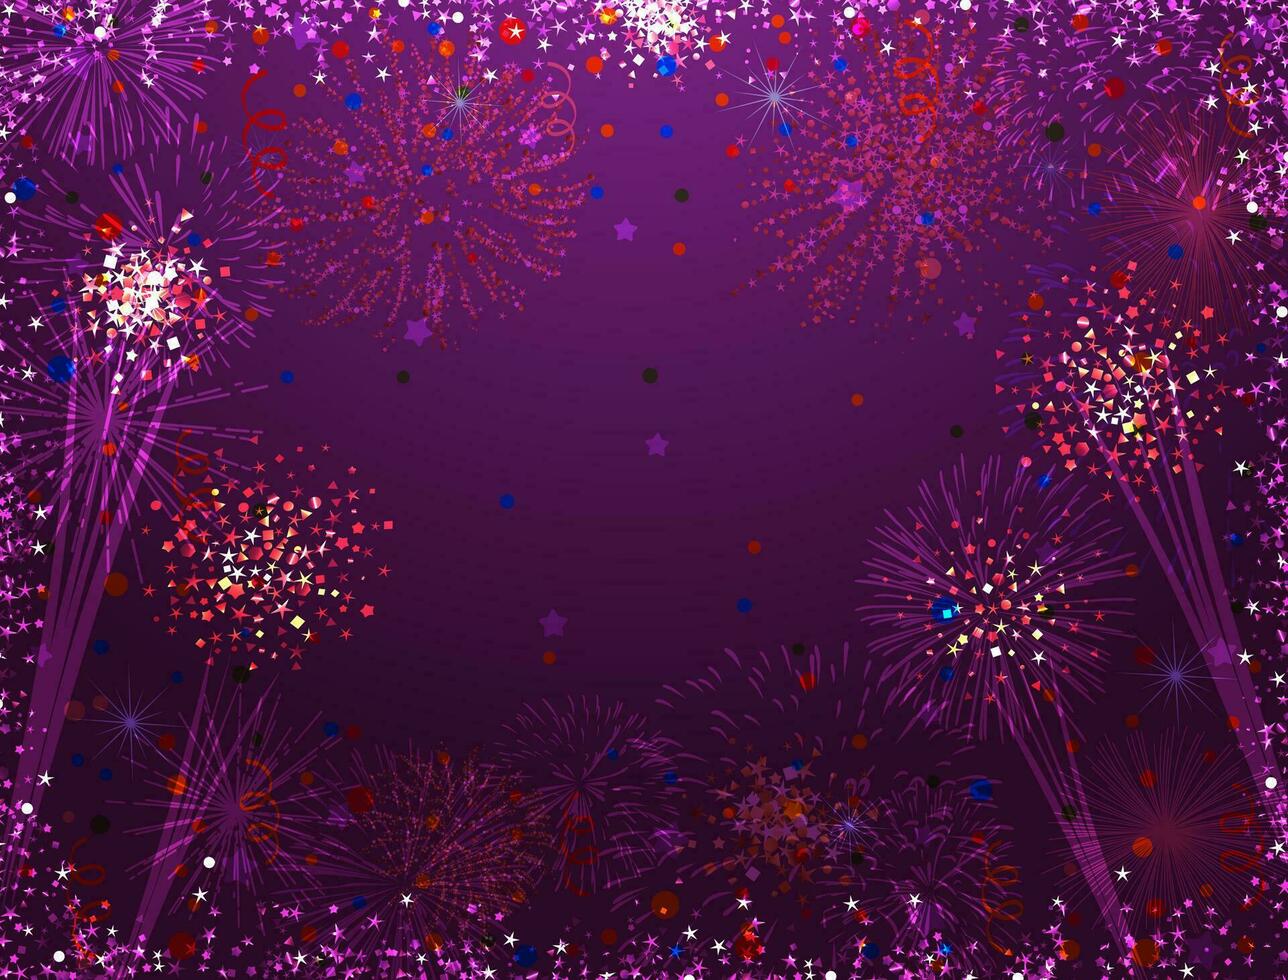 Holiday background. Purple color, glittering confetti, shiny fireworks. Festive expressive design. Greeting card template. Postcard or banner concept. Isolated elements. Abstract backdrop. Empty blank vector